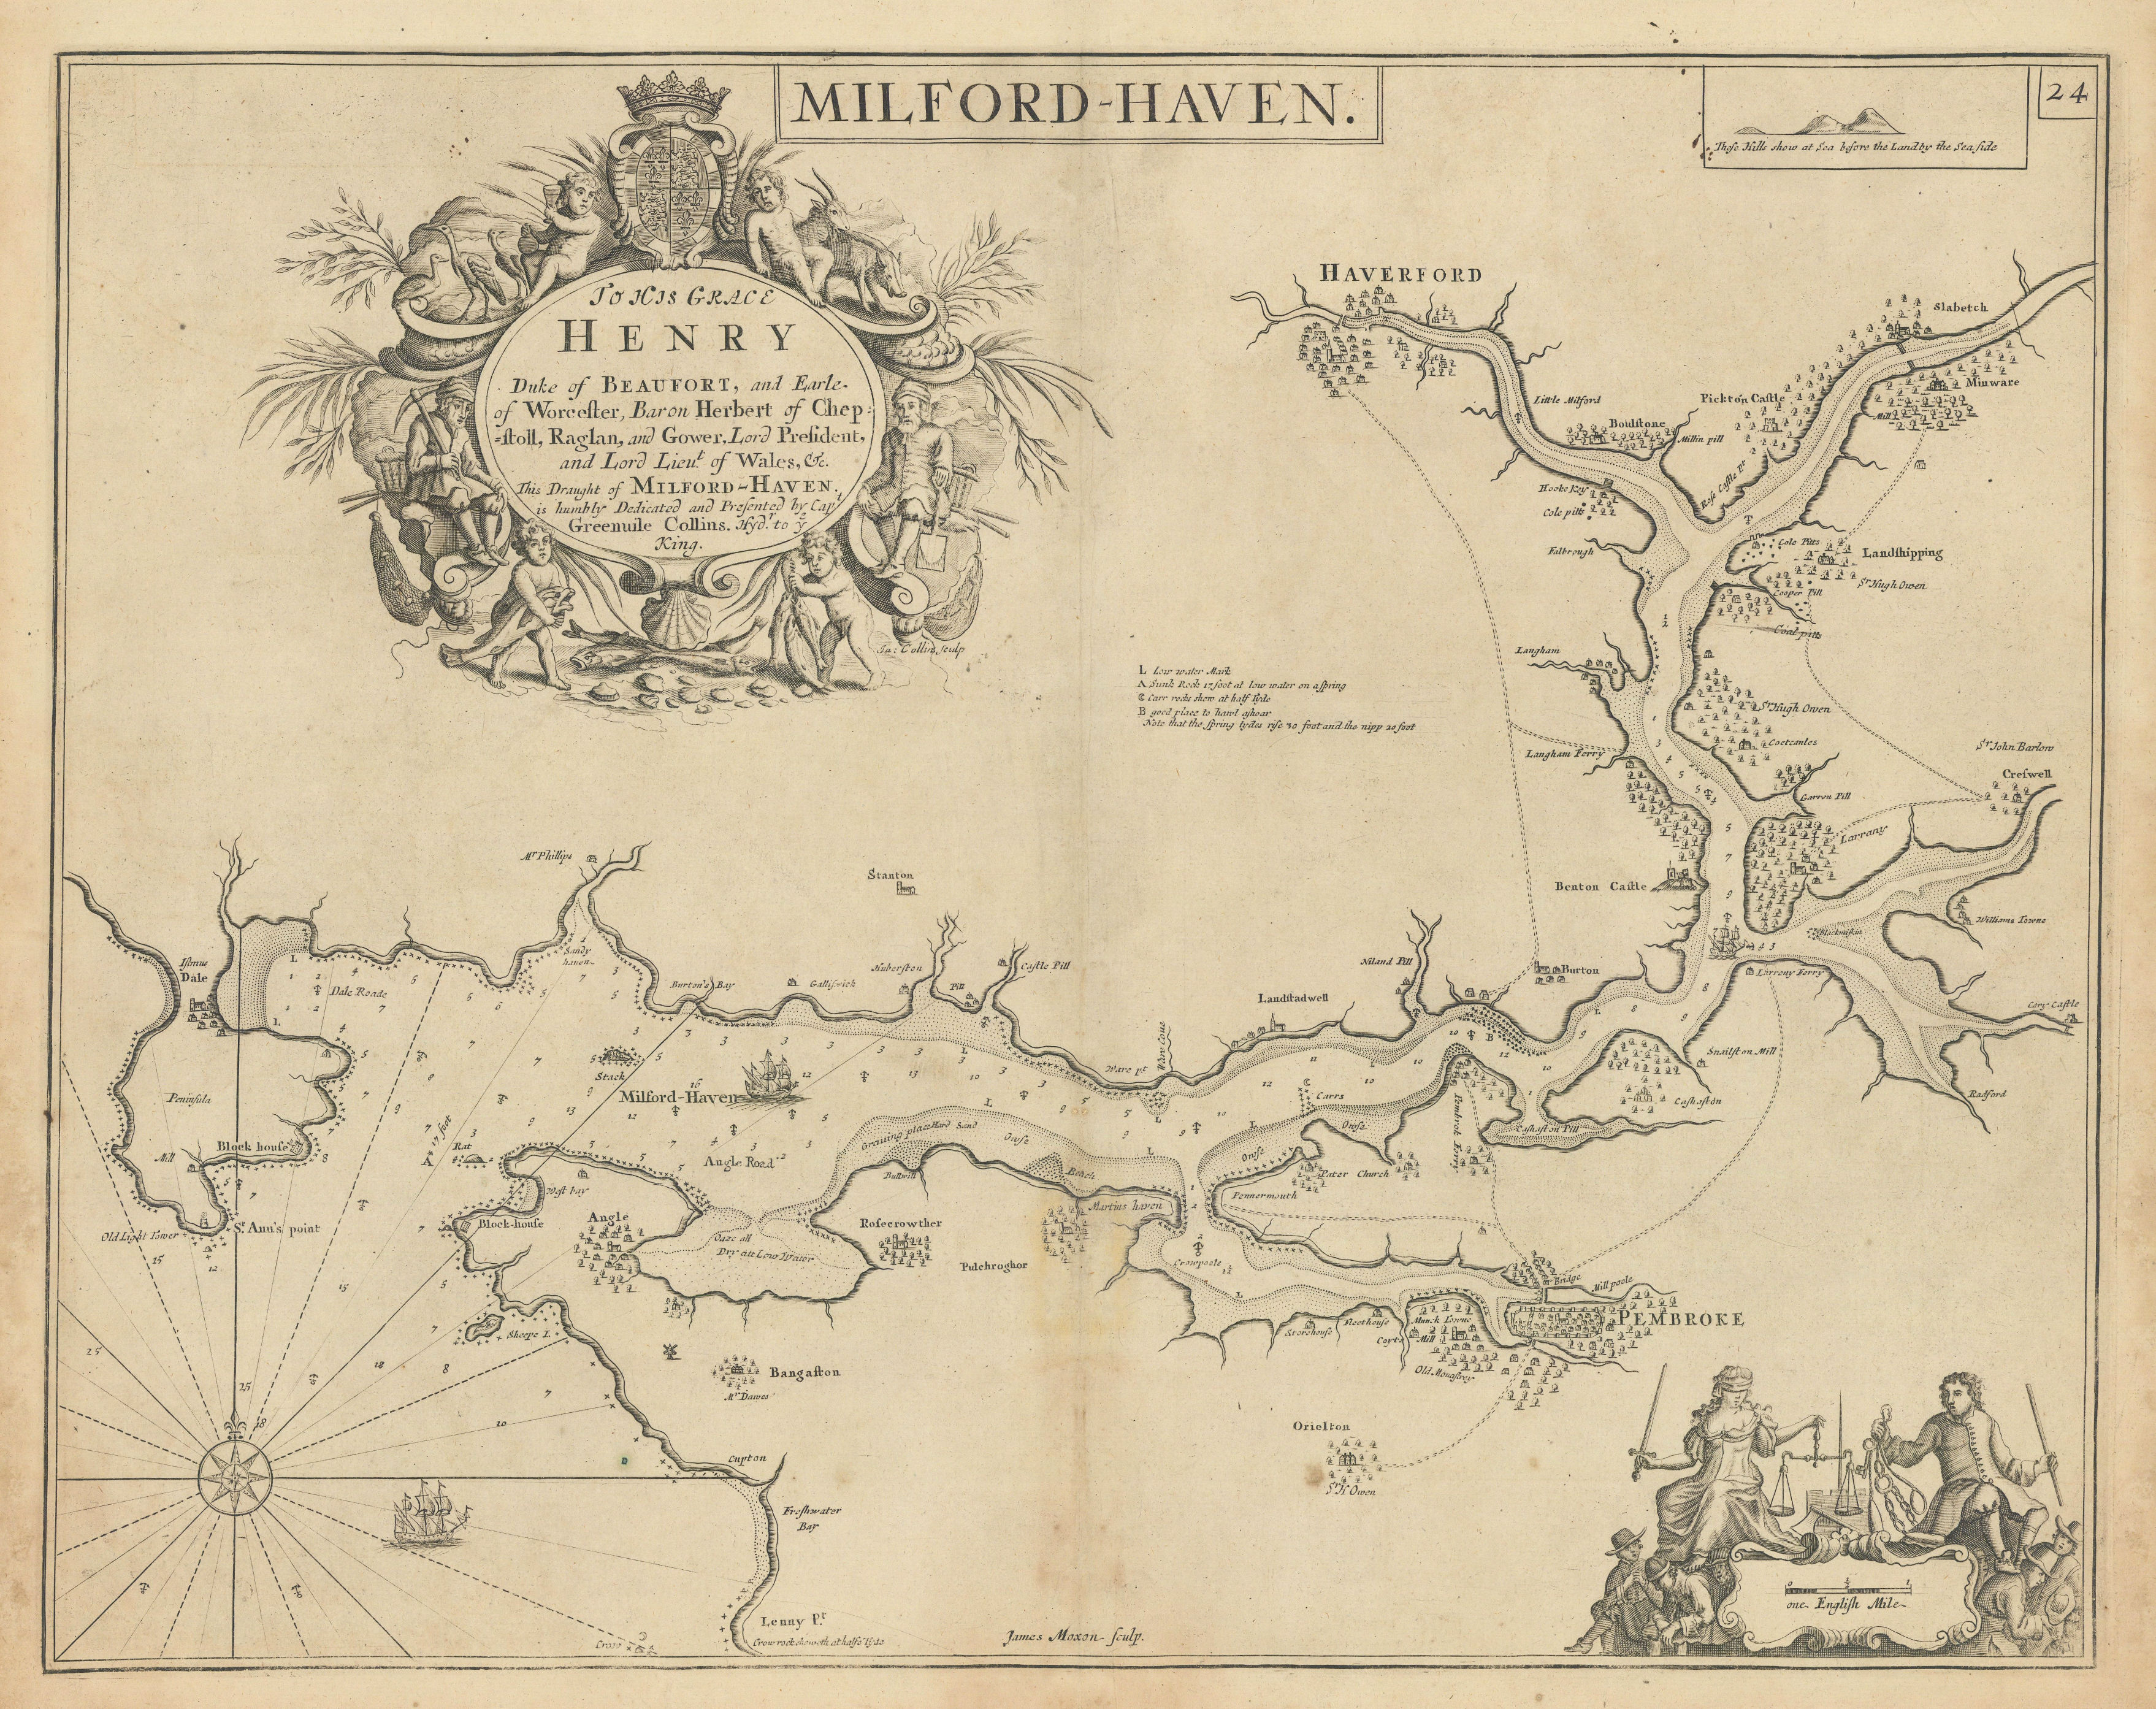 Associate Product Milford Haven sea chart. Haverfordwest Pembrokeshire. COLLINS 1723 old map